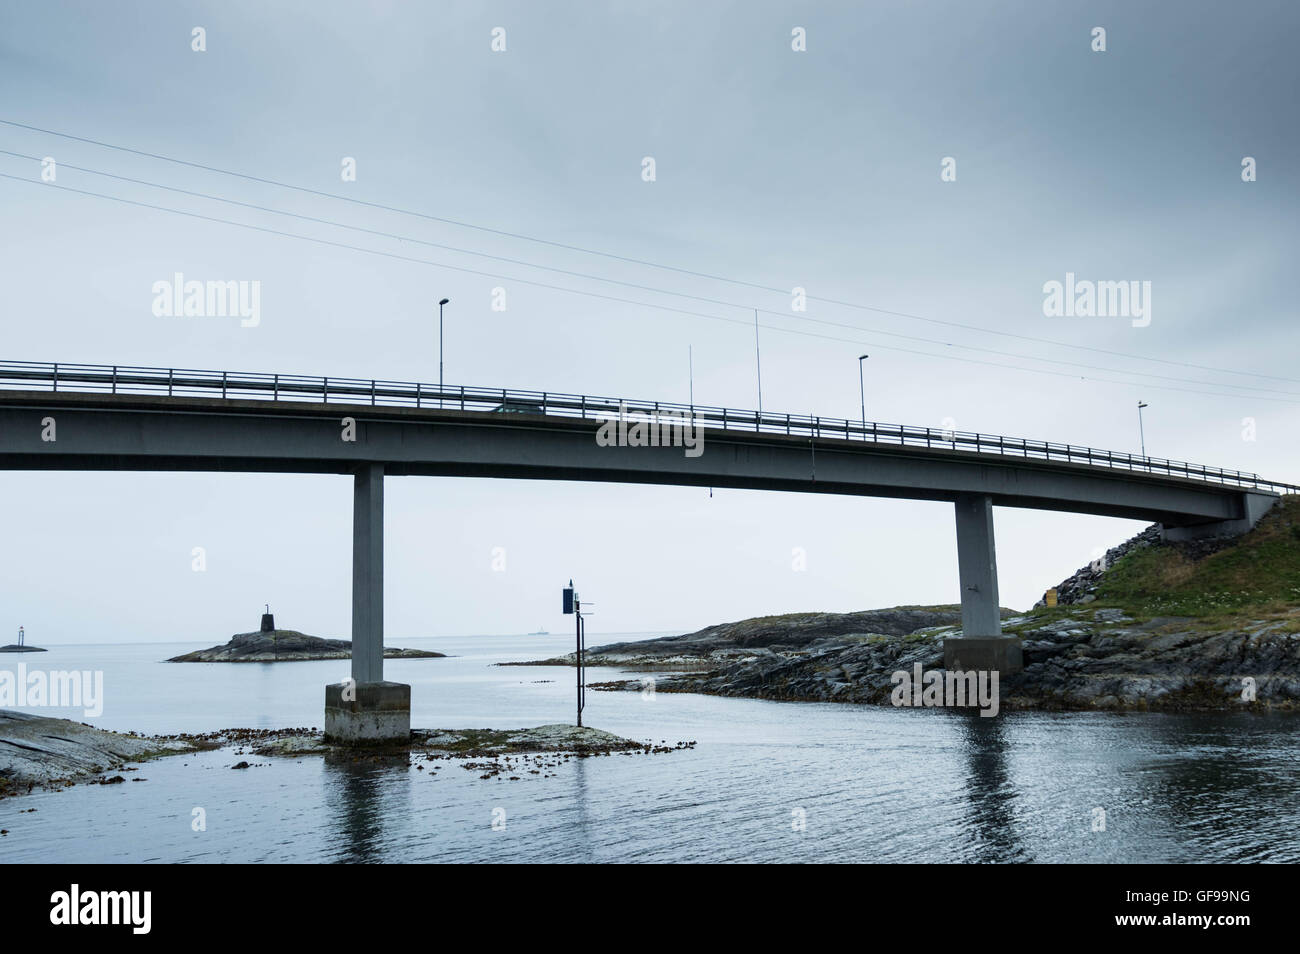 One of the many bridges on the Atlantic Road in Romsdal, Norway. Stock Photo